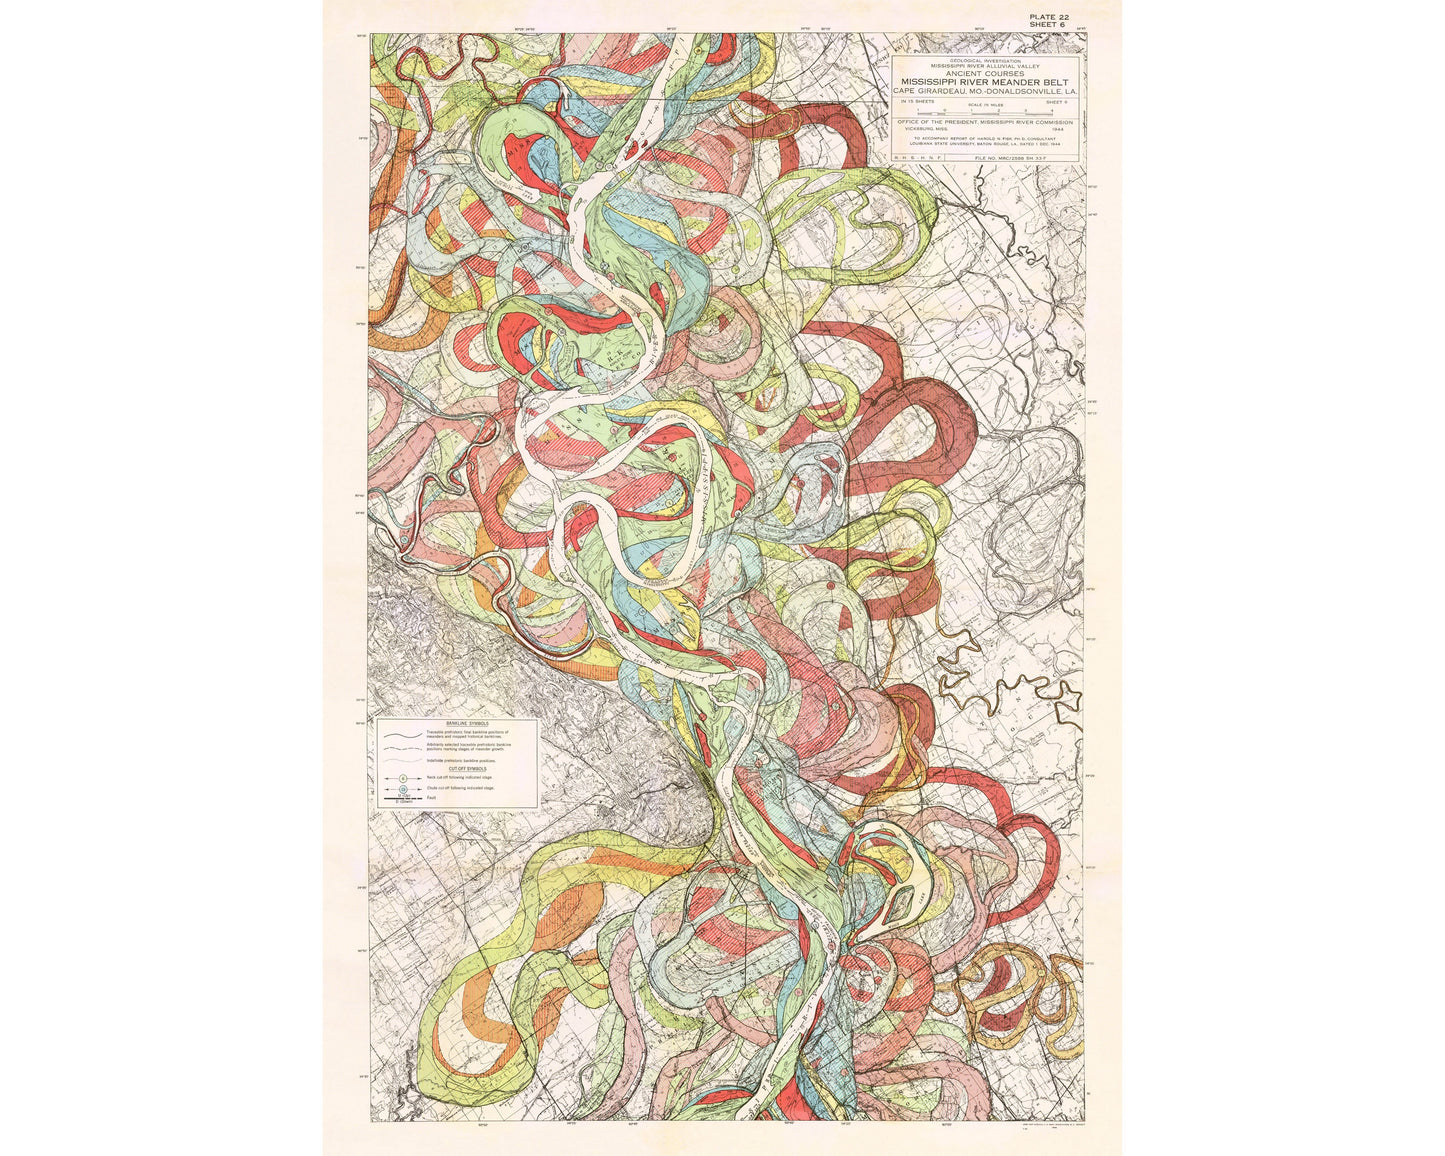 Mississippi River Meander print | Colorful geography wall art | Vintage topographical map  | Antique American cartography | Travelers art